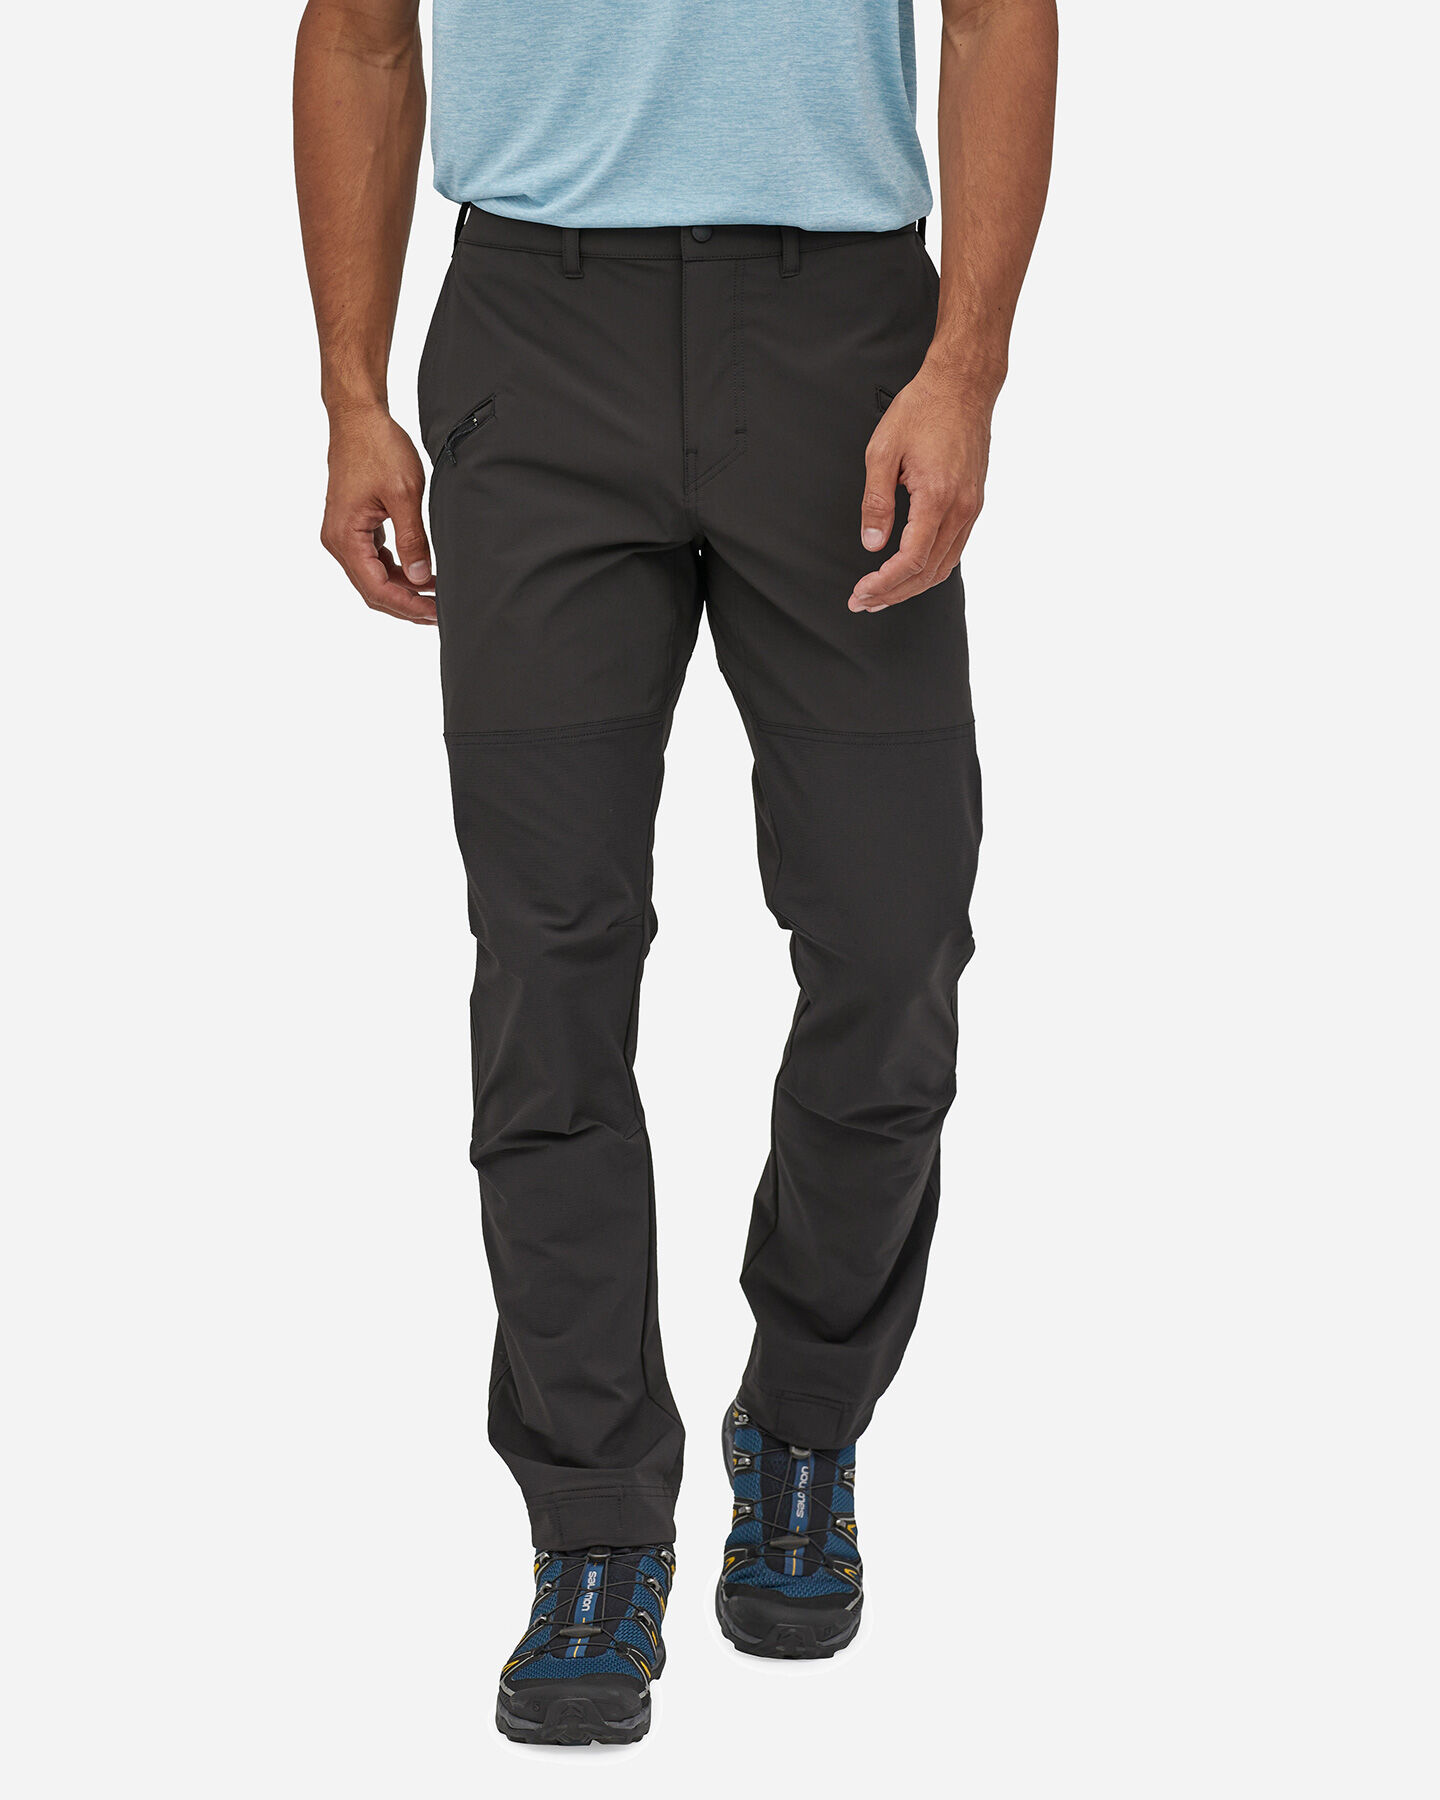  Pantalone outdoor PATAGONIA POINT PEAK TRAIL M S4097087|BLK|34 scatto 0